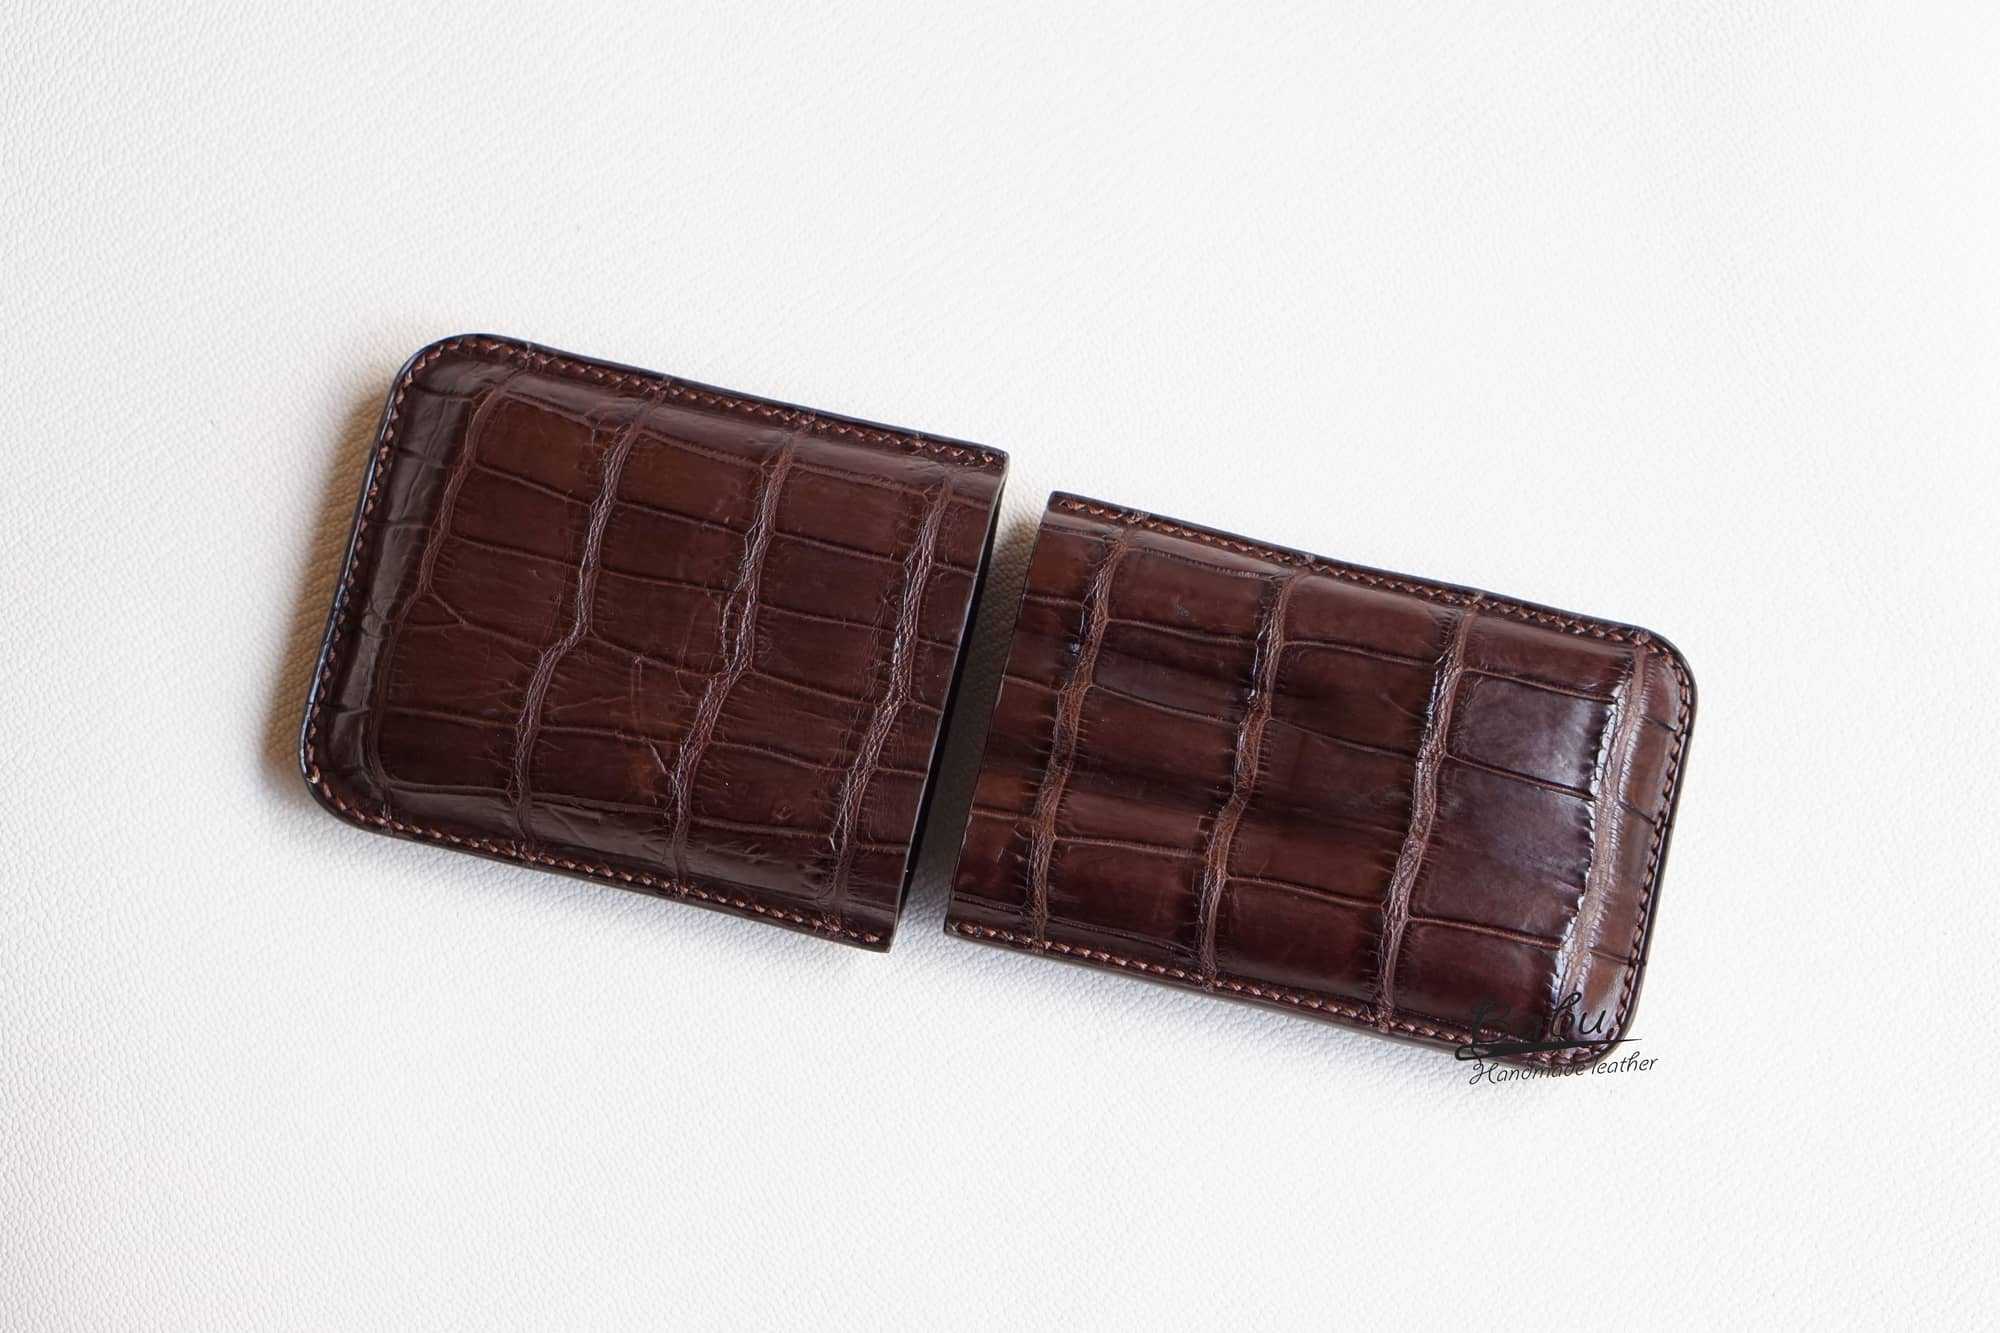 24 Leather Cigar Cases to Protect Your Precious Smokes - Groovy